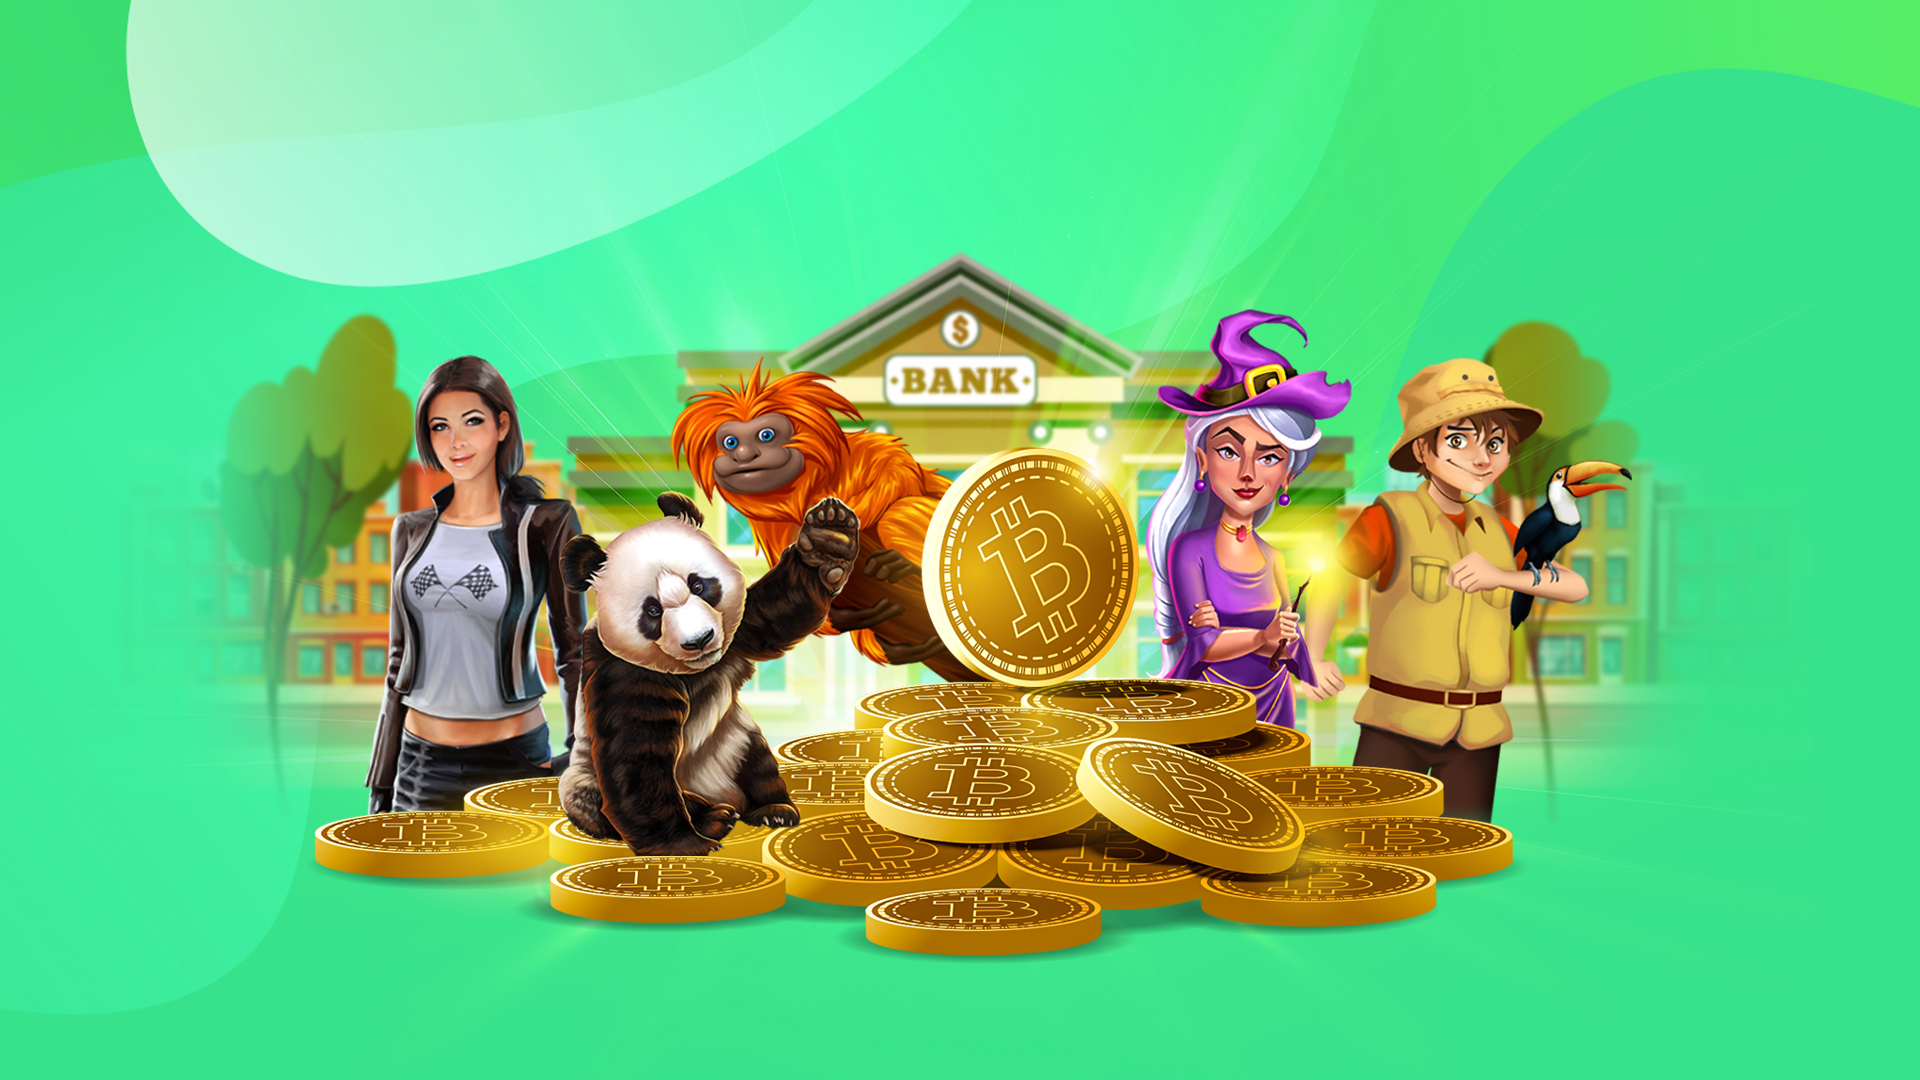 Various 3D characters, including humans and animals, from SLotsLV slots games stand around golden Bitcoins in front of a golden bank.